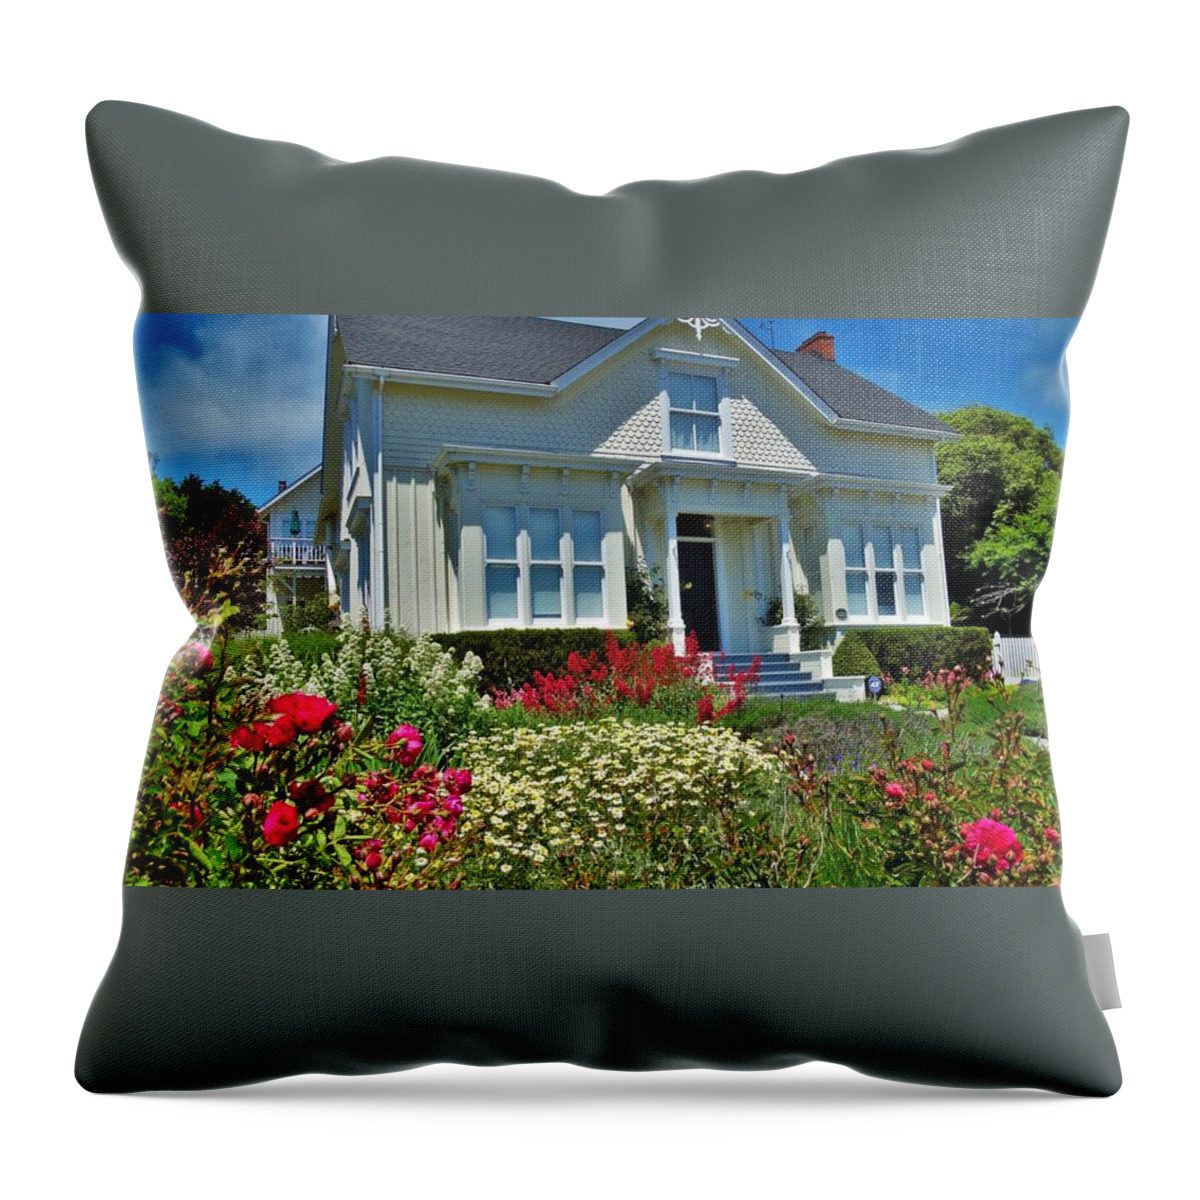 Mendocino Throw Pillow featuring the photograph Mendocino Cottage by Lisa Dunn